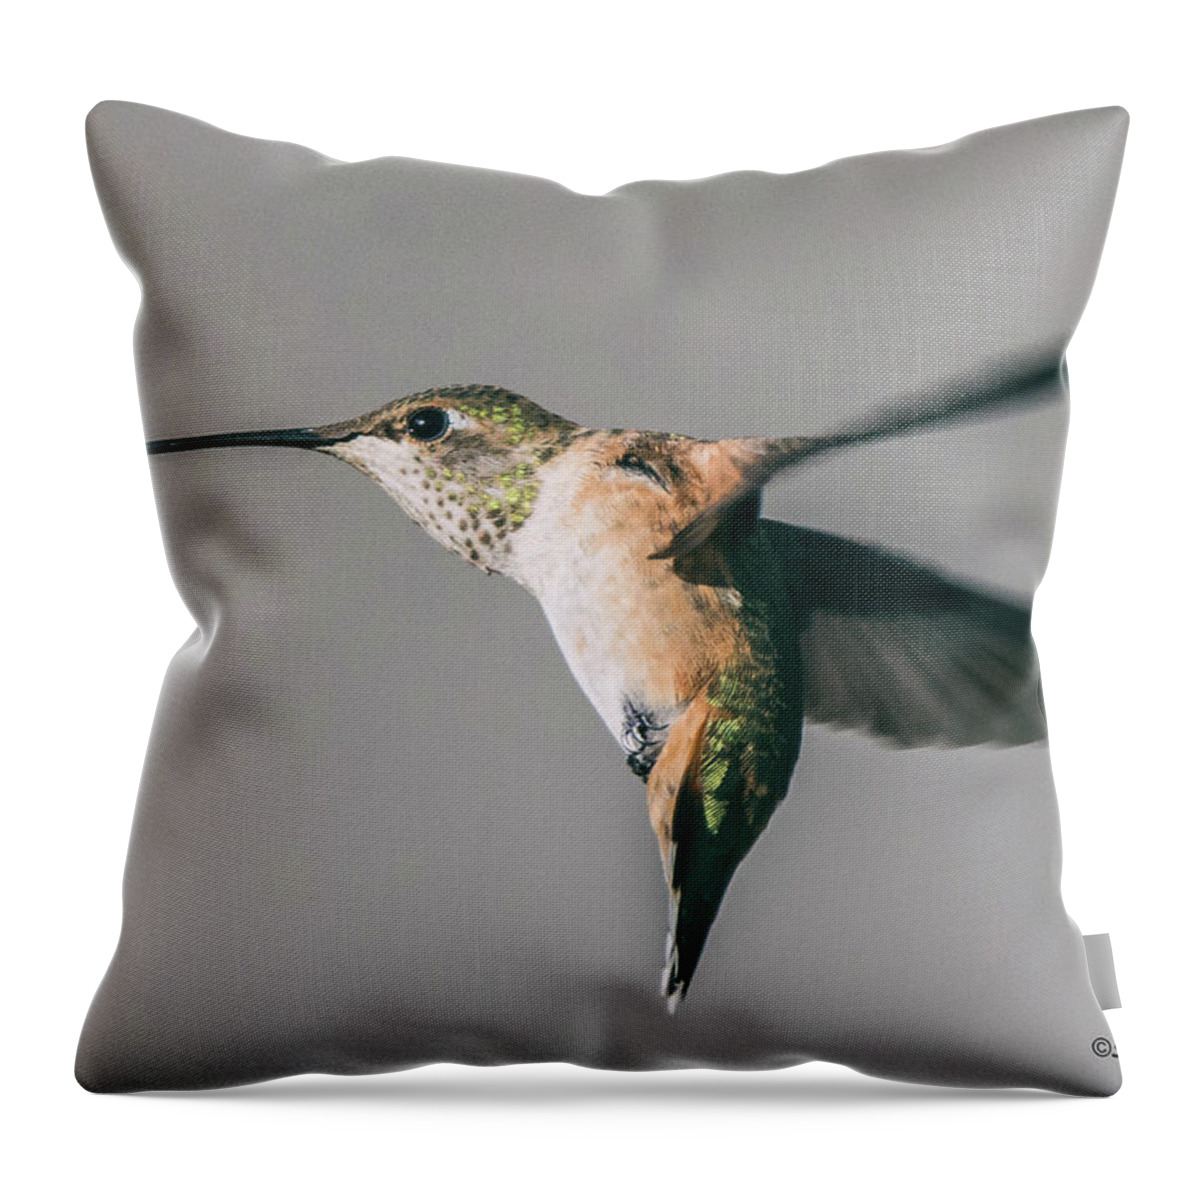 Hummingbird Throw Pillow featuring the photograph Broad-tailed Hummingbird Approaching Feeder by Stephen Johnson